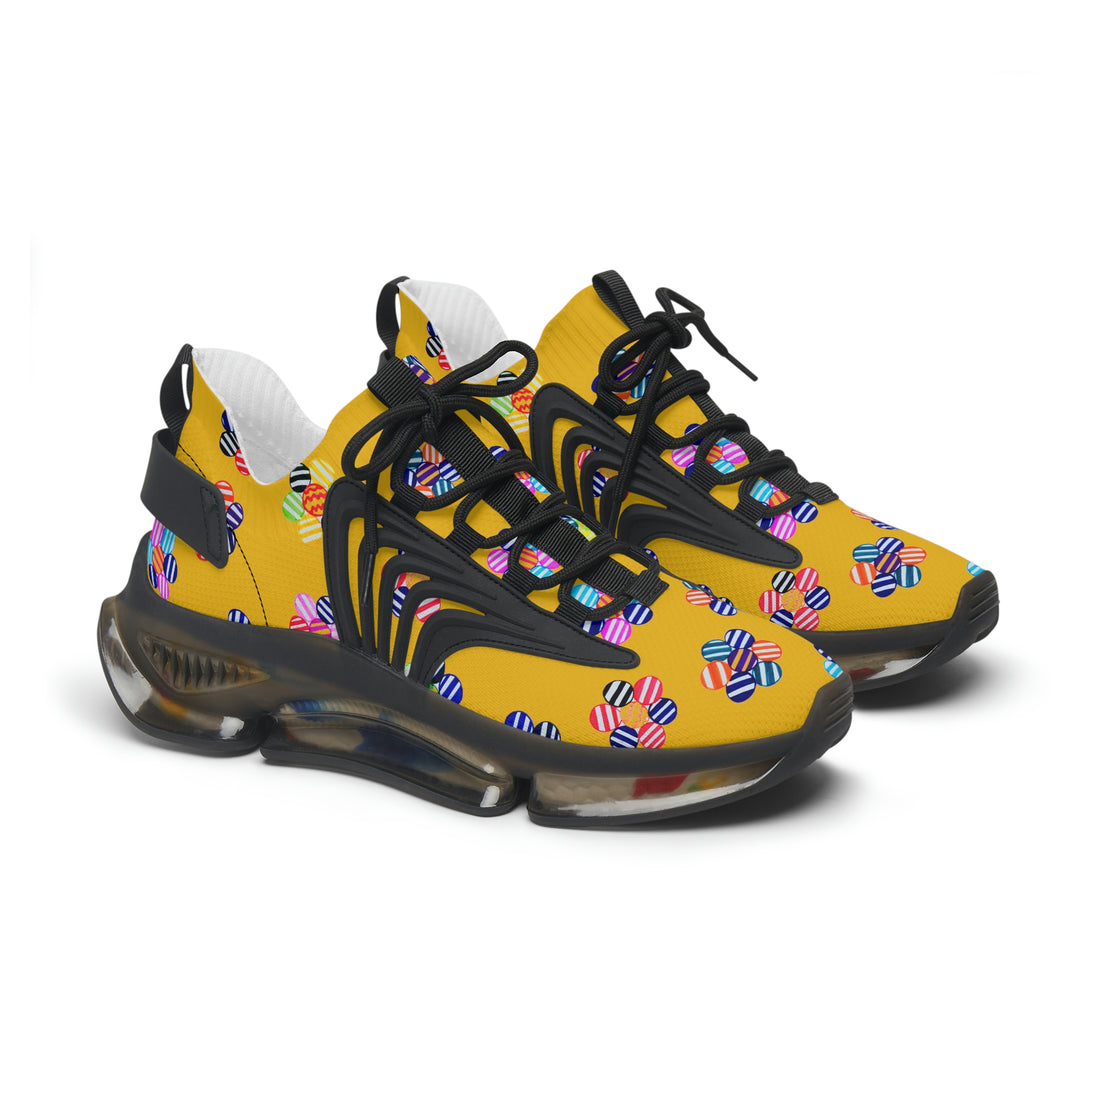 Yellow Candy Floral Printed OTT Women's Mesh Knit Sneakers